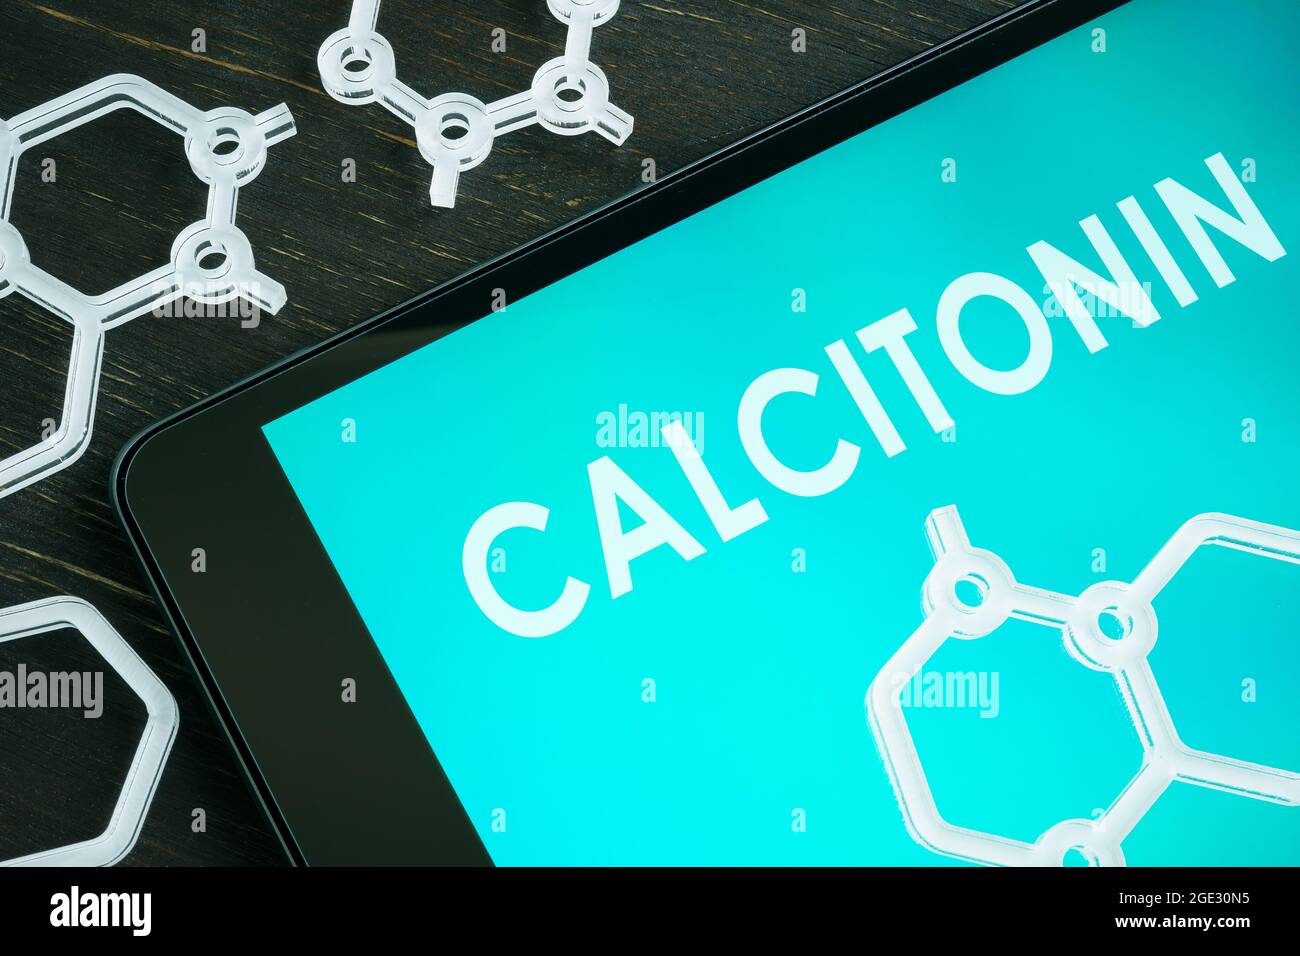 Calcitonin hormone on the notepad screen and chemical symbols. Stock Photo